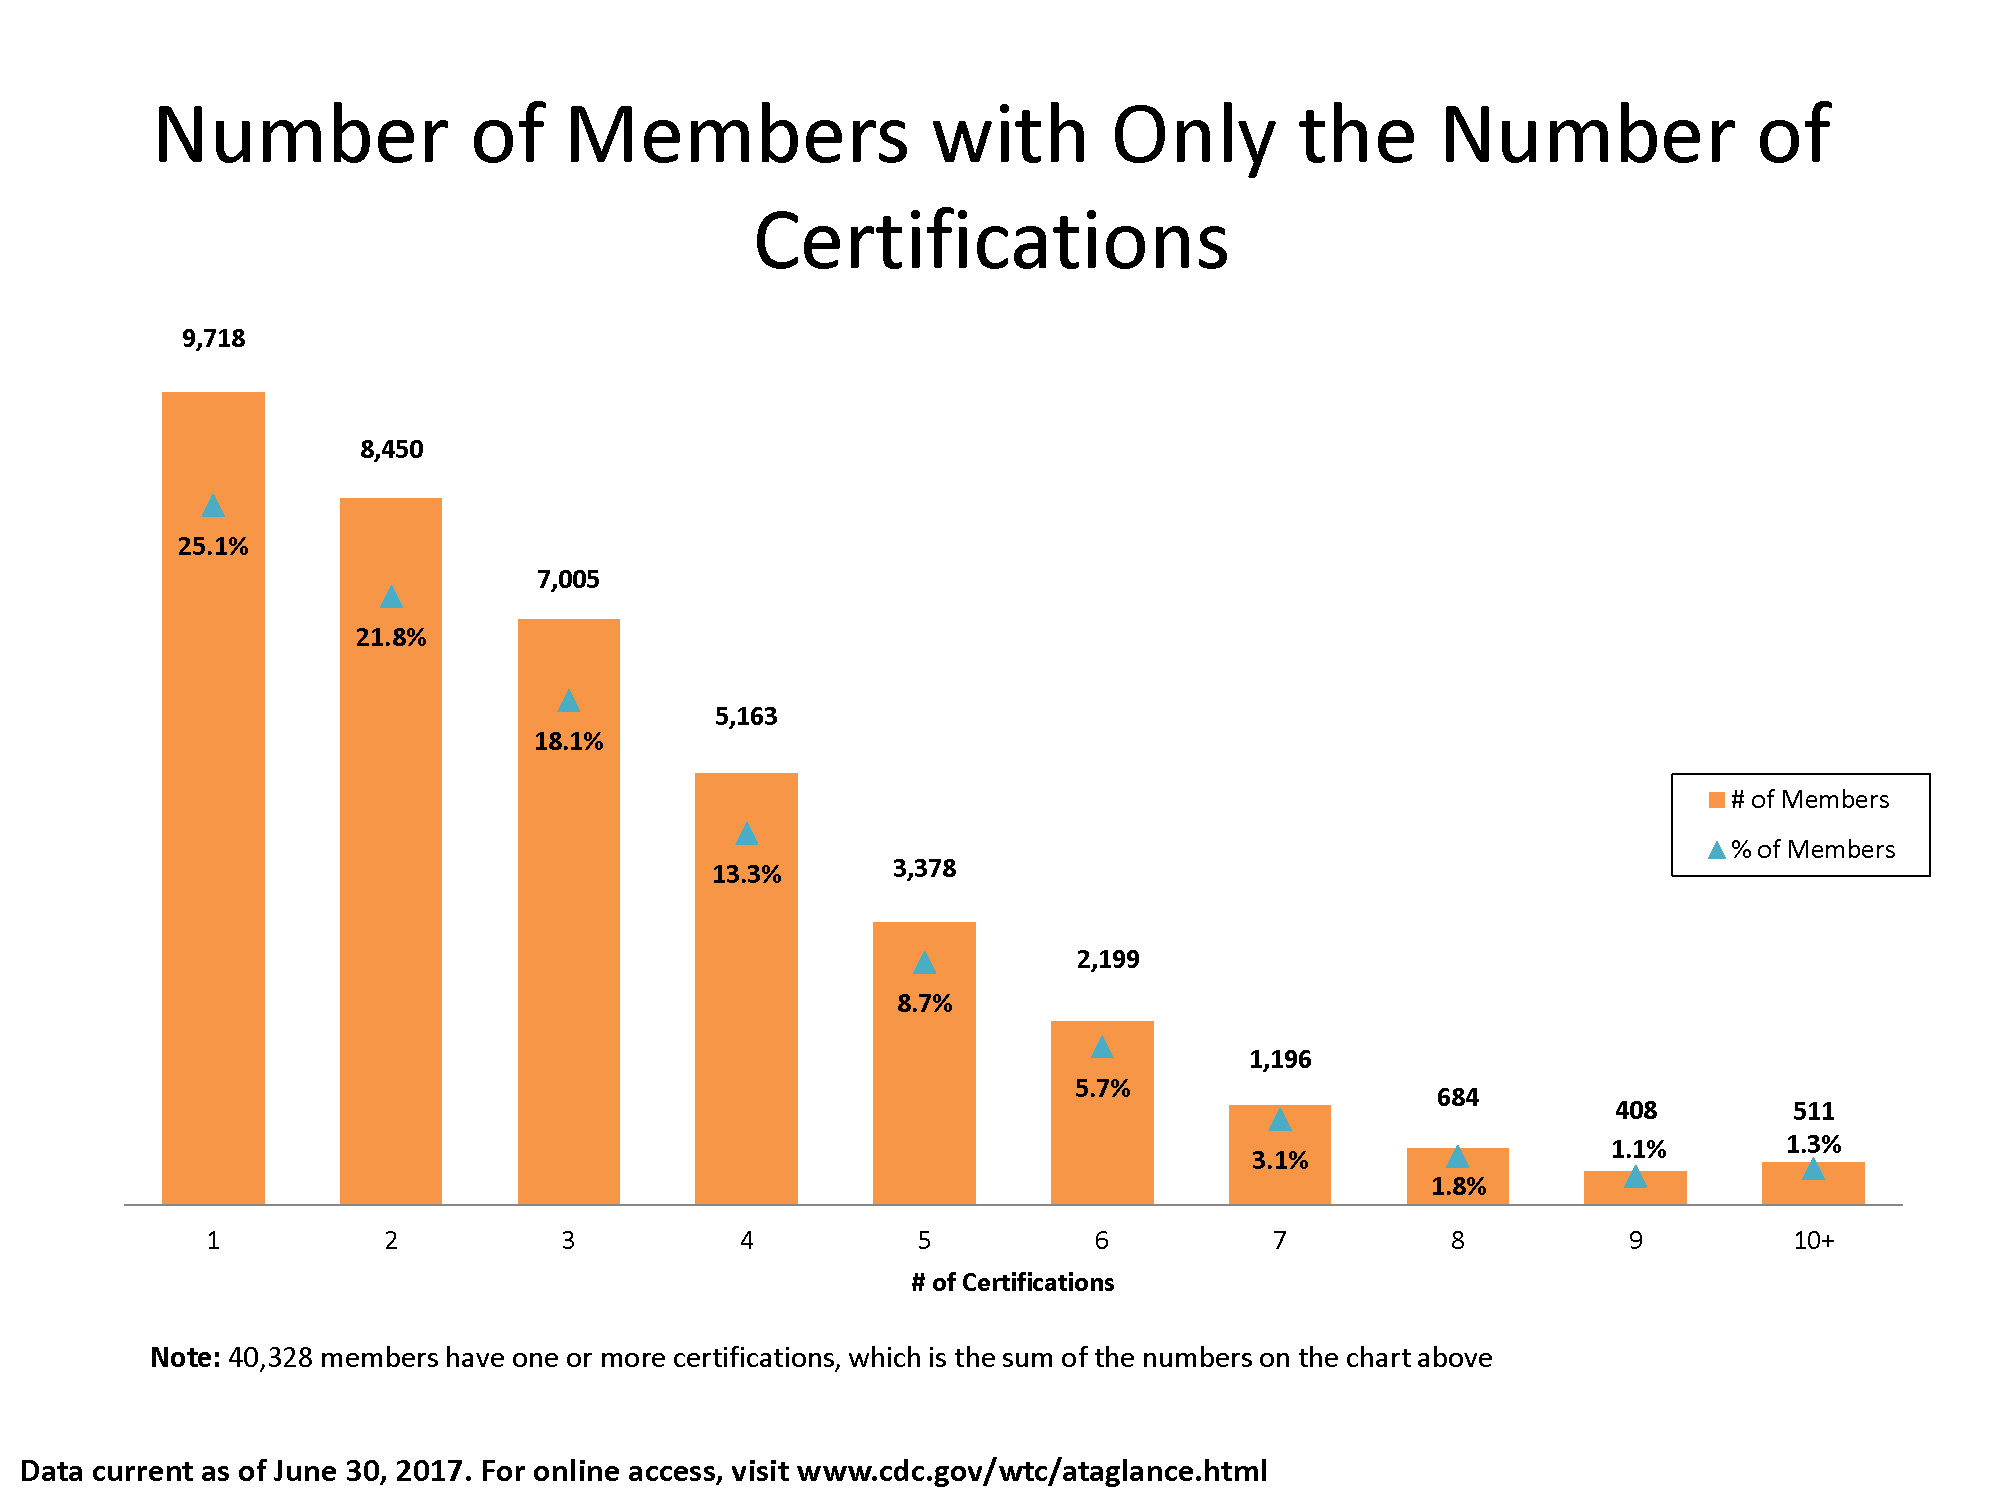 Bar chart showing the number of members with different numbers of certifications:

9,718 (25.1%) members have 1 certification.
8,450 (21.8%) members have 2 certifications.
7,005 (18.1%) members have 3 certifications.
5,163 (13.3%) members have 4 certifications.
3,378 (8.7%) members have 5 certifications.
2,199 (5.7%) members have 6 certifications.
1,196 (3.1%) members have 7 certifications.
684 (1.8%) members have 8 certifications.
408 (1.1%) members have 9 certifications.
511 (1.3%) members have 10+ certifications.